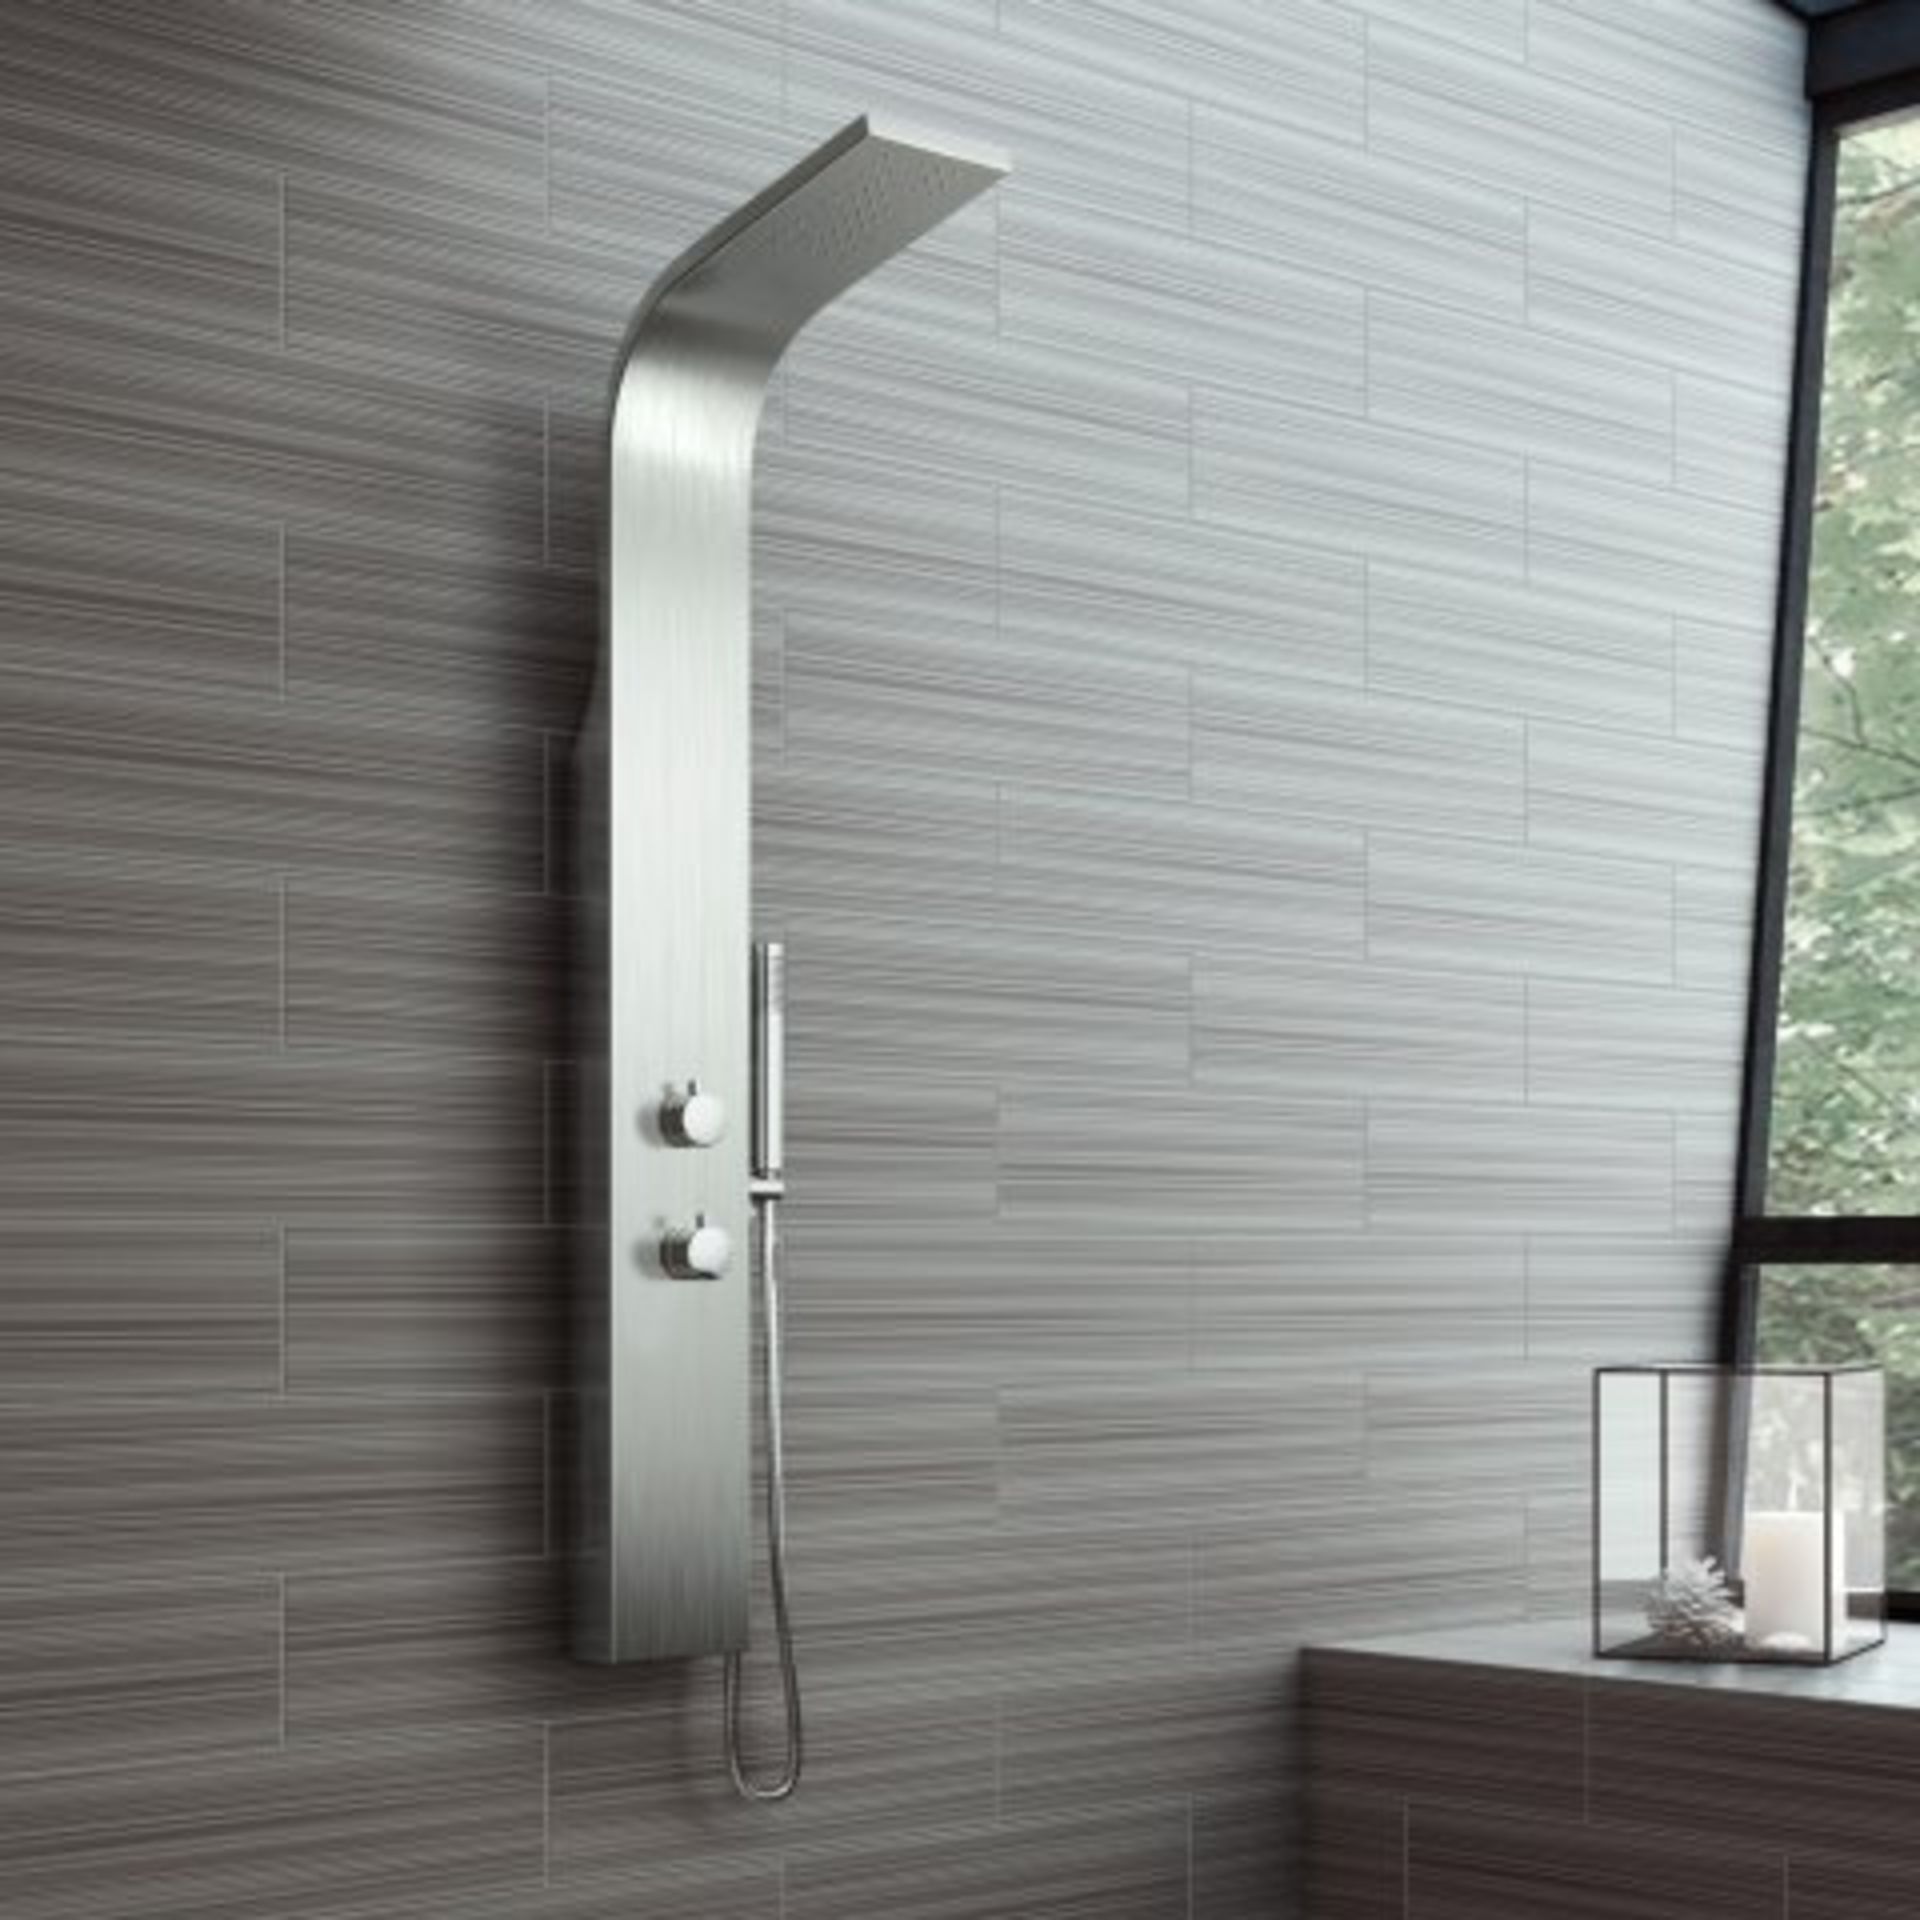 (I1) Brushed Steel Shower Panel Tower. RRP £499.99. Feel inspired with our premium shower panel